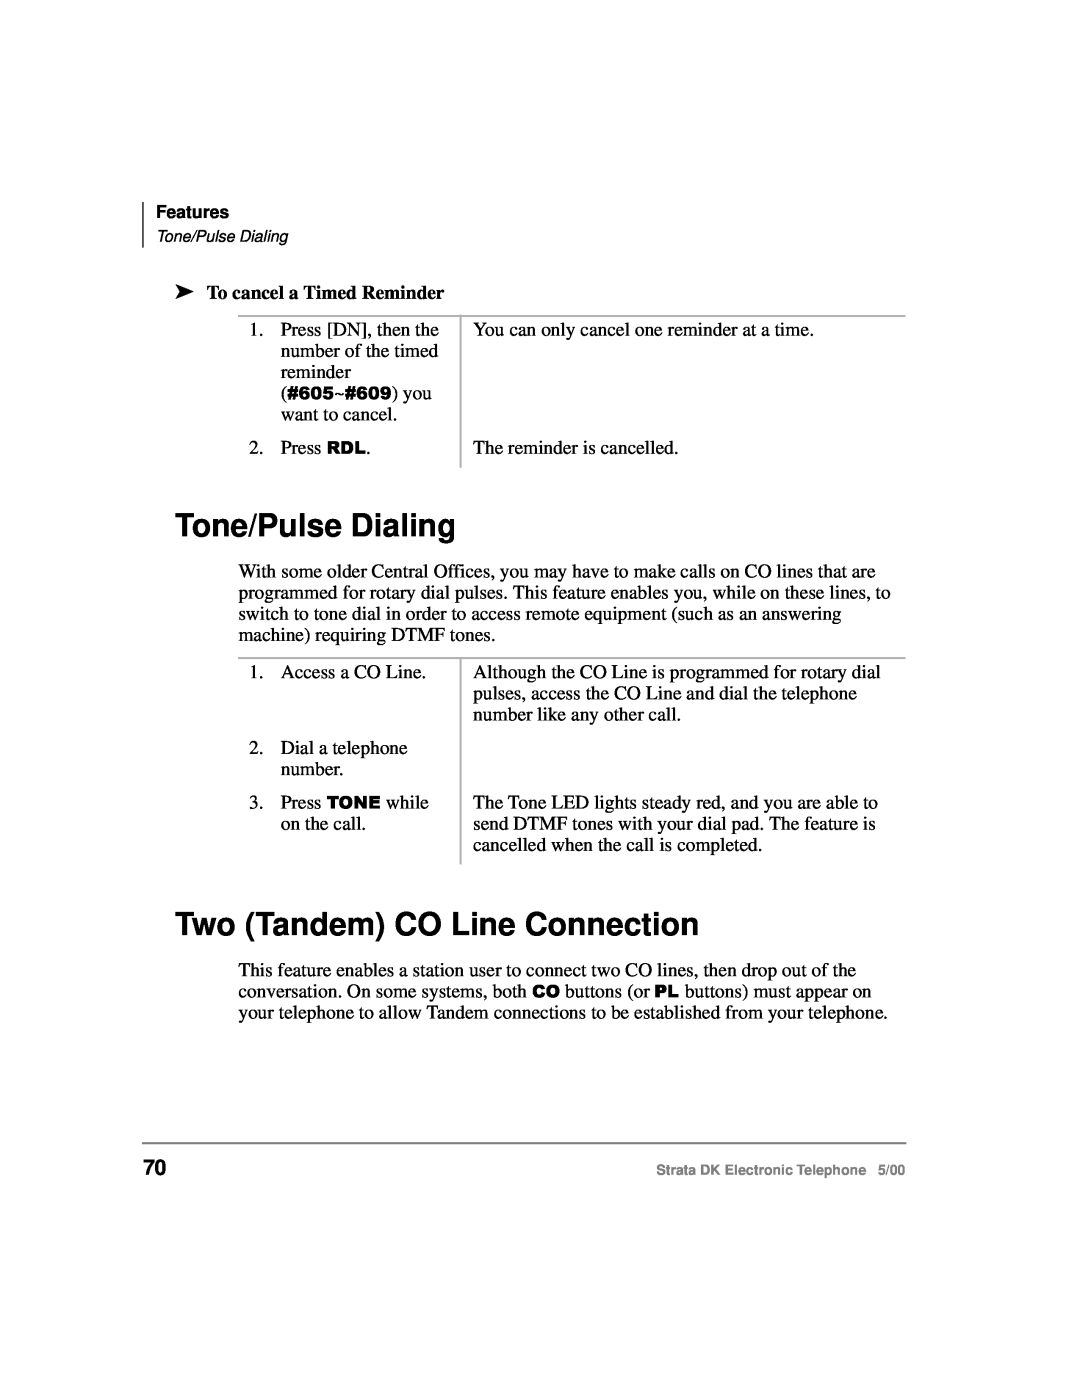 Toshiba Strata DK manual Tone/Pulse Dialing, Two Tandem CO Line Connection, To cancel a Timed Reminder 